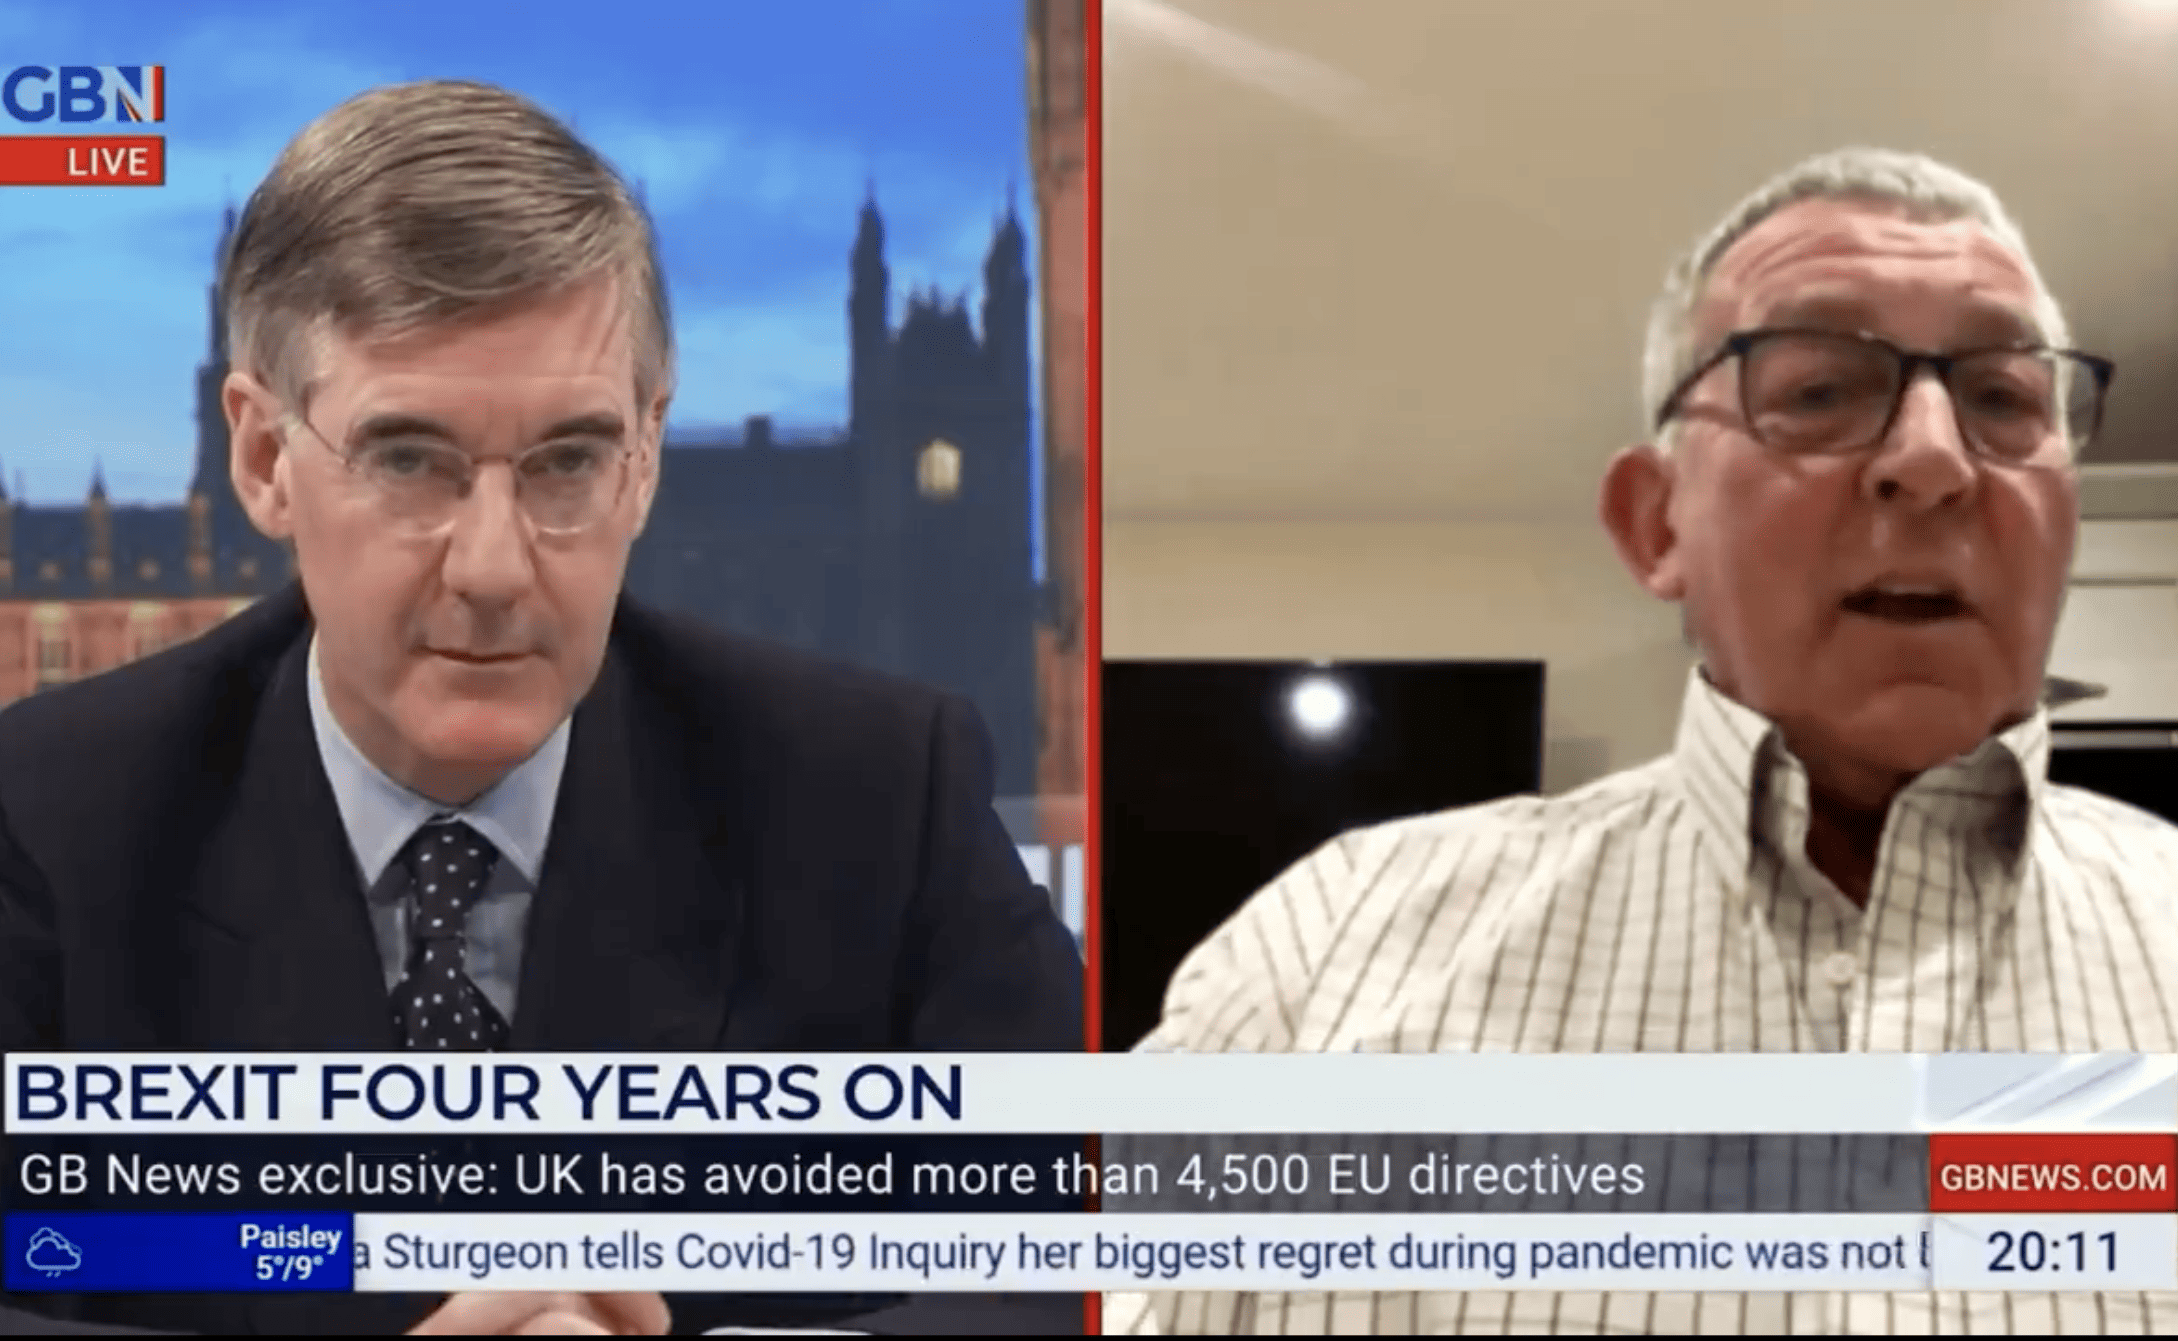 Rees-Mogg cuts off farmer threatening to spoil his Brexit anniversary show